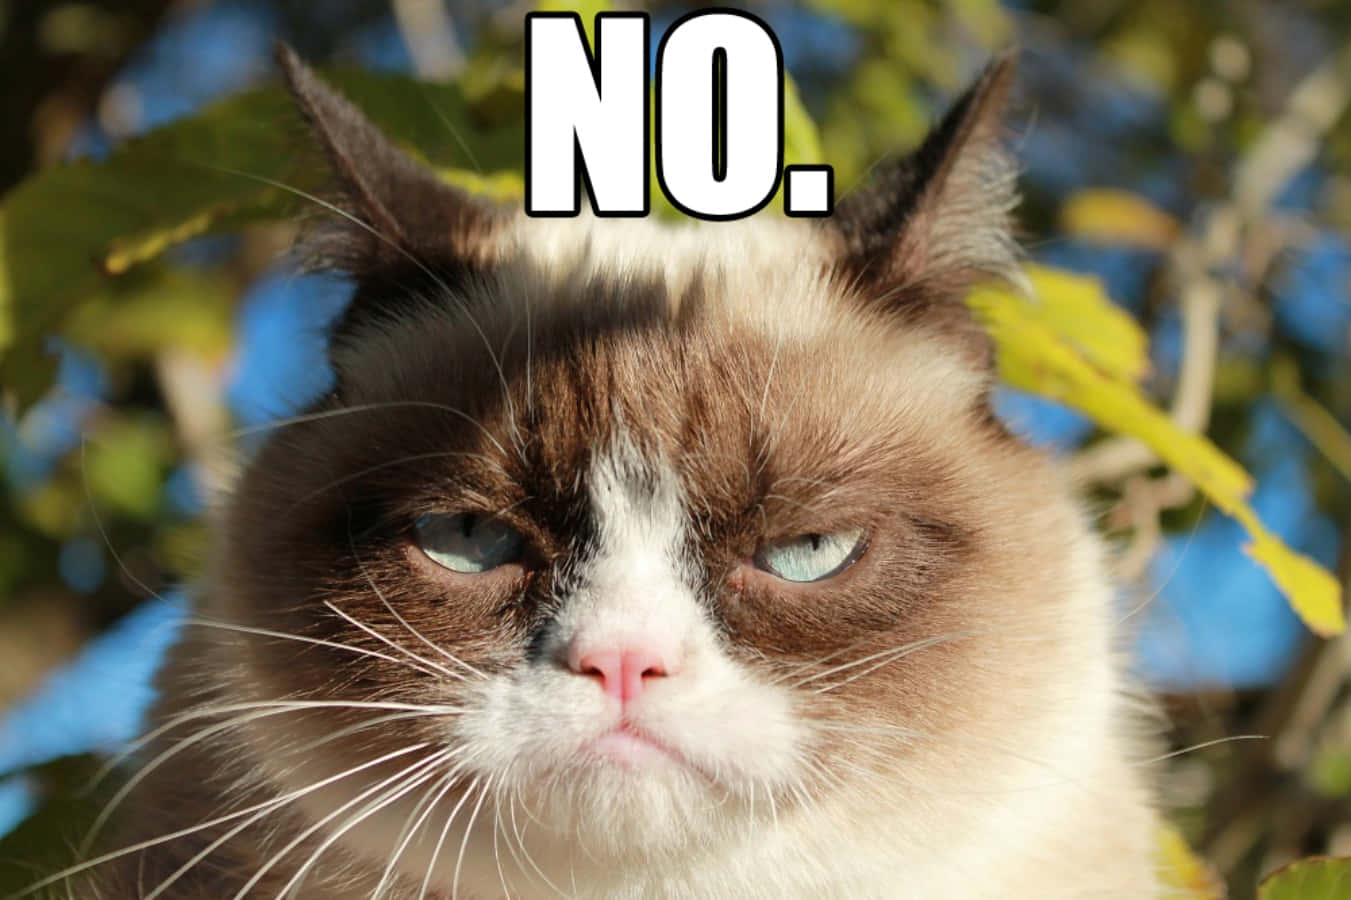 Here Are The Best Grumpy Cat Memes — Fifth Sun Blog